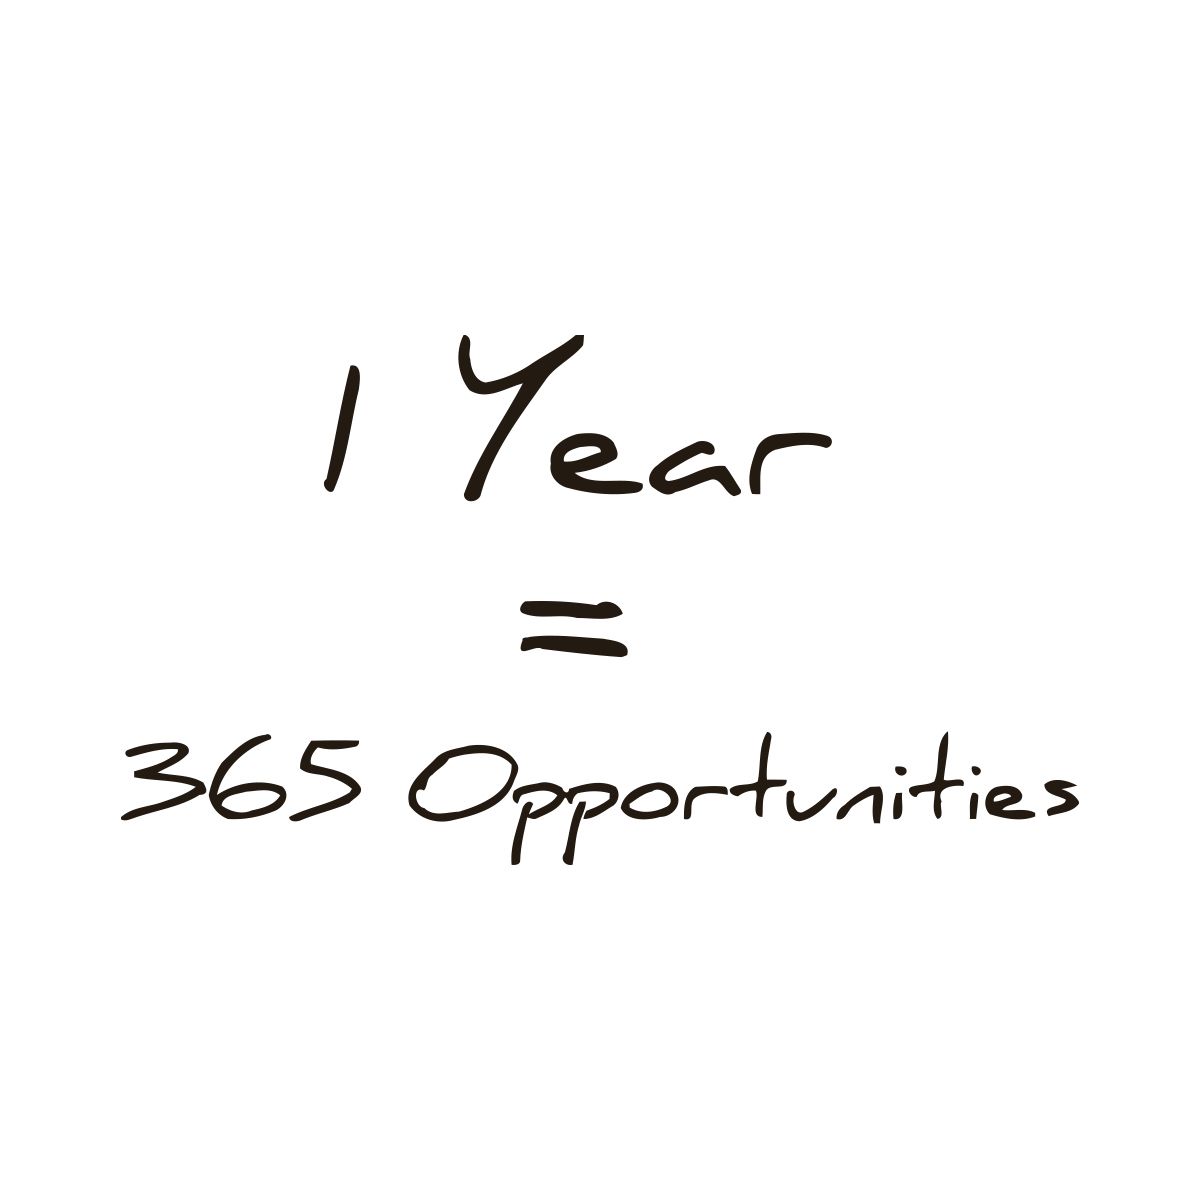 1 Year 365 Opportunities Do It And How